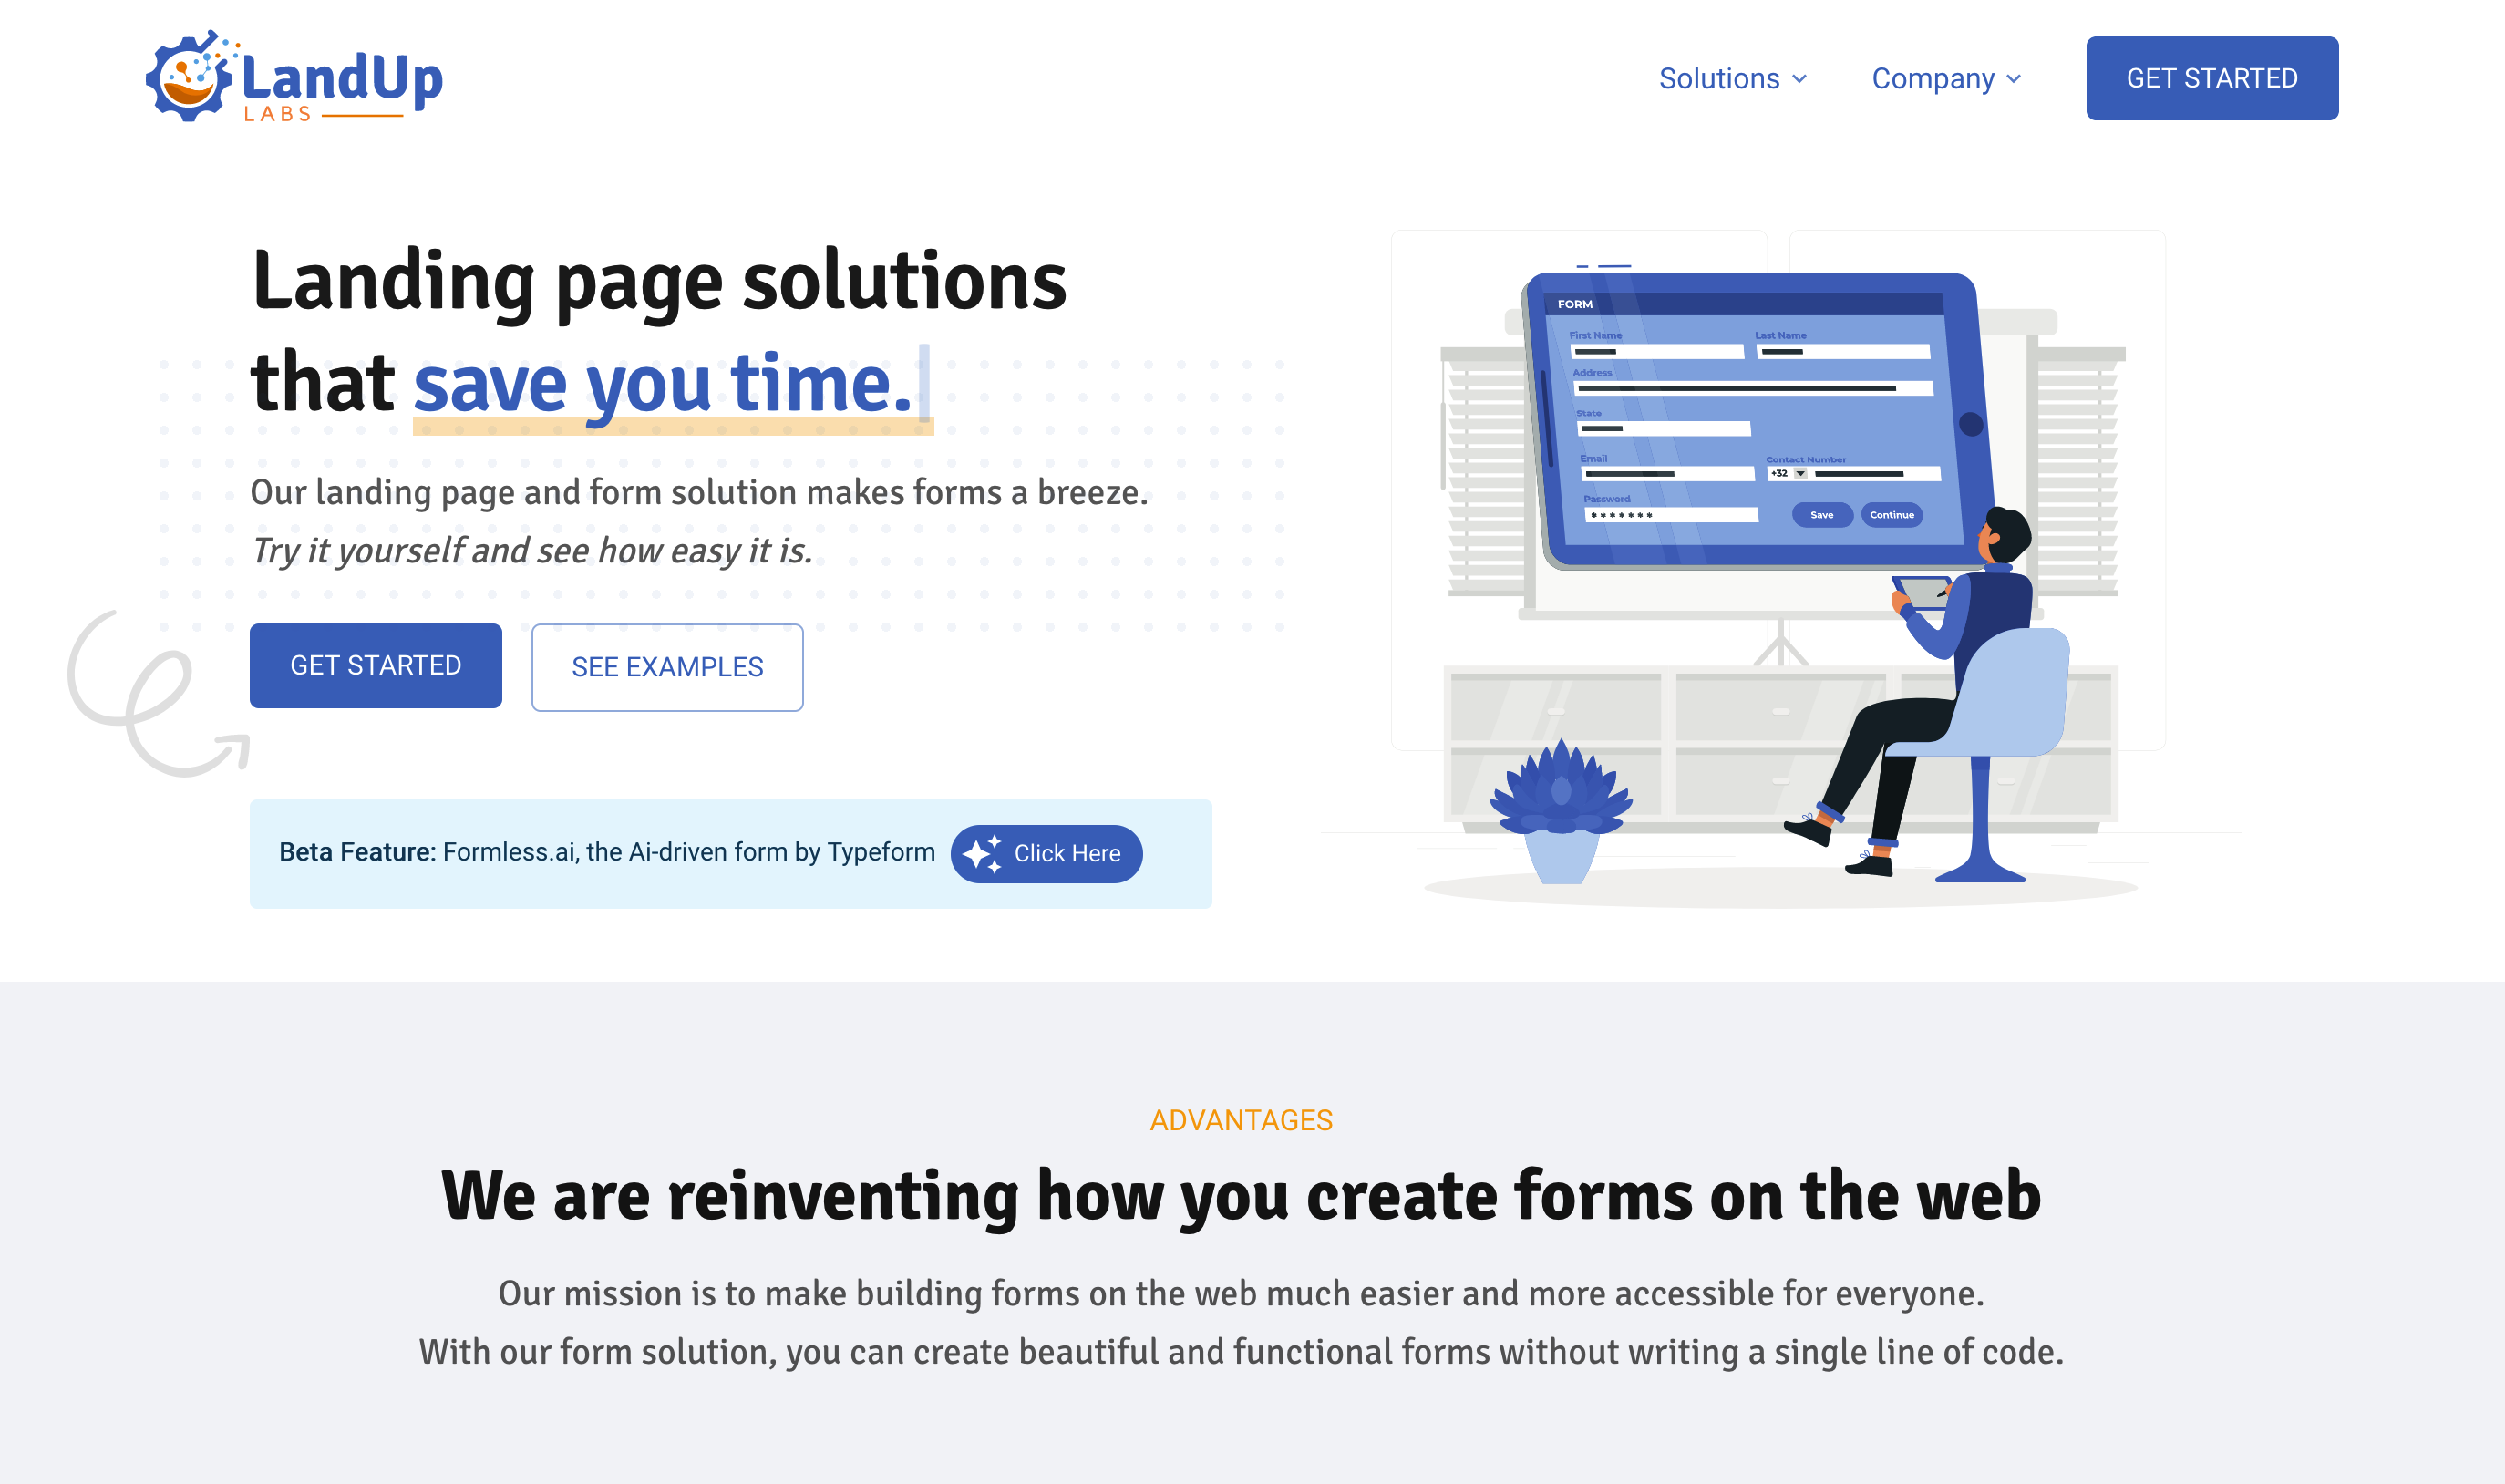 LandUp Labs - Landing page templates with dynamic forms, powered by Builder.io